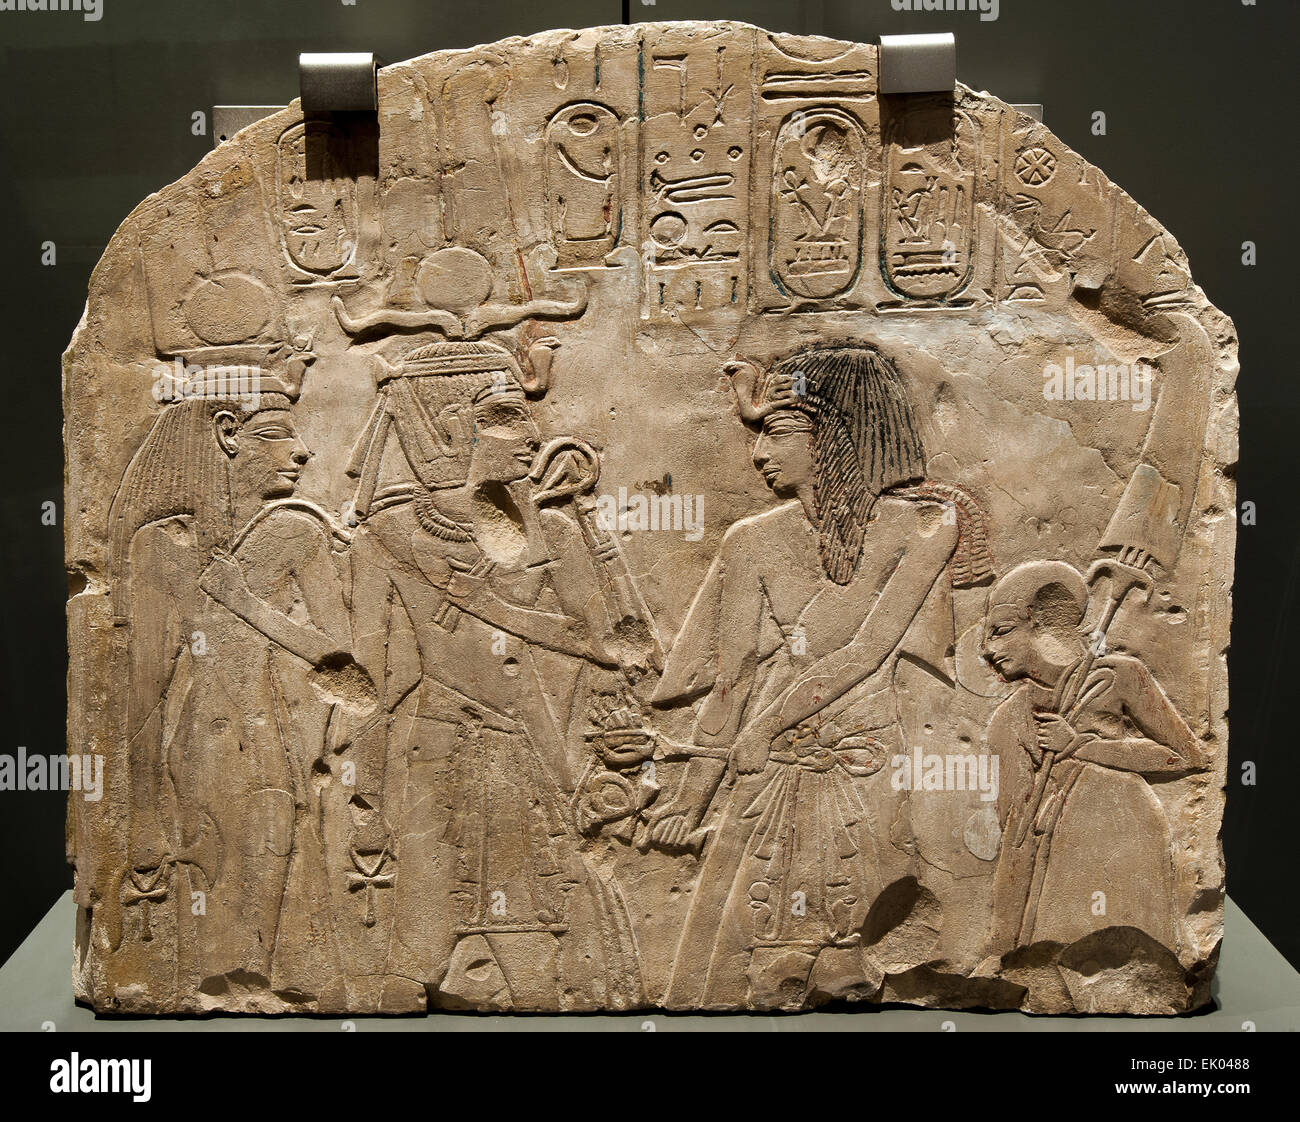 Italy Piedmont Turin Egyptian Museum  new staging - Room 6 - Stele depicting Sethy I and a vizier That adore Amenhotep I Stock Photo